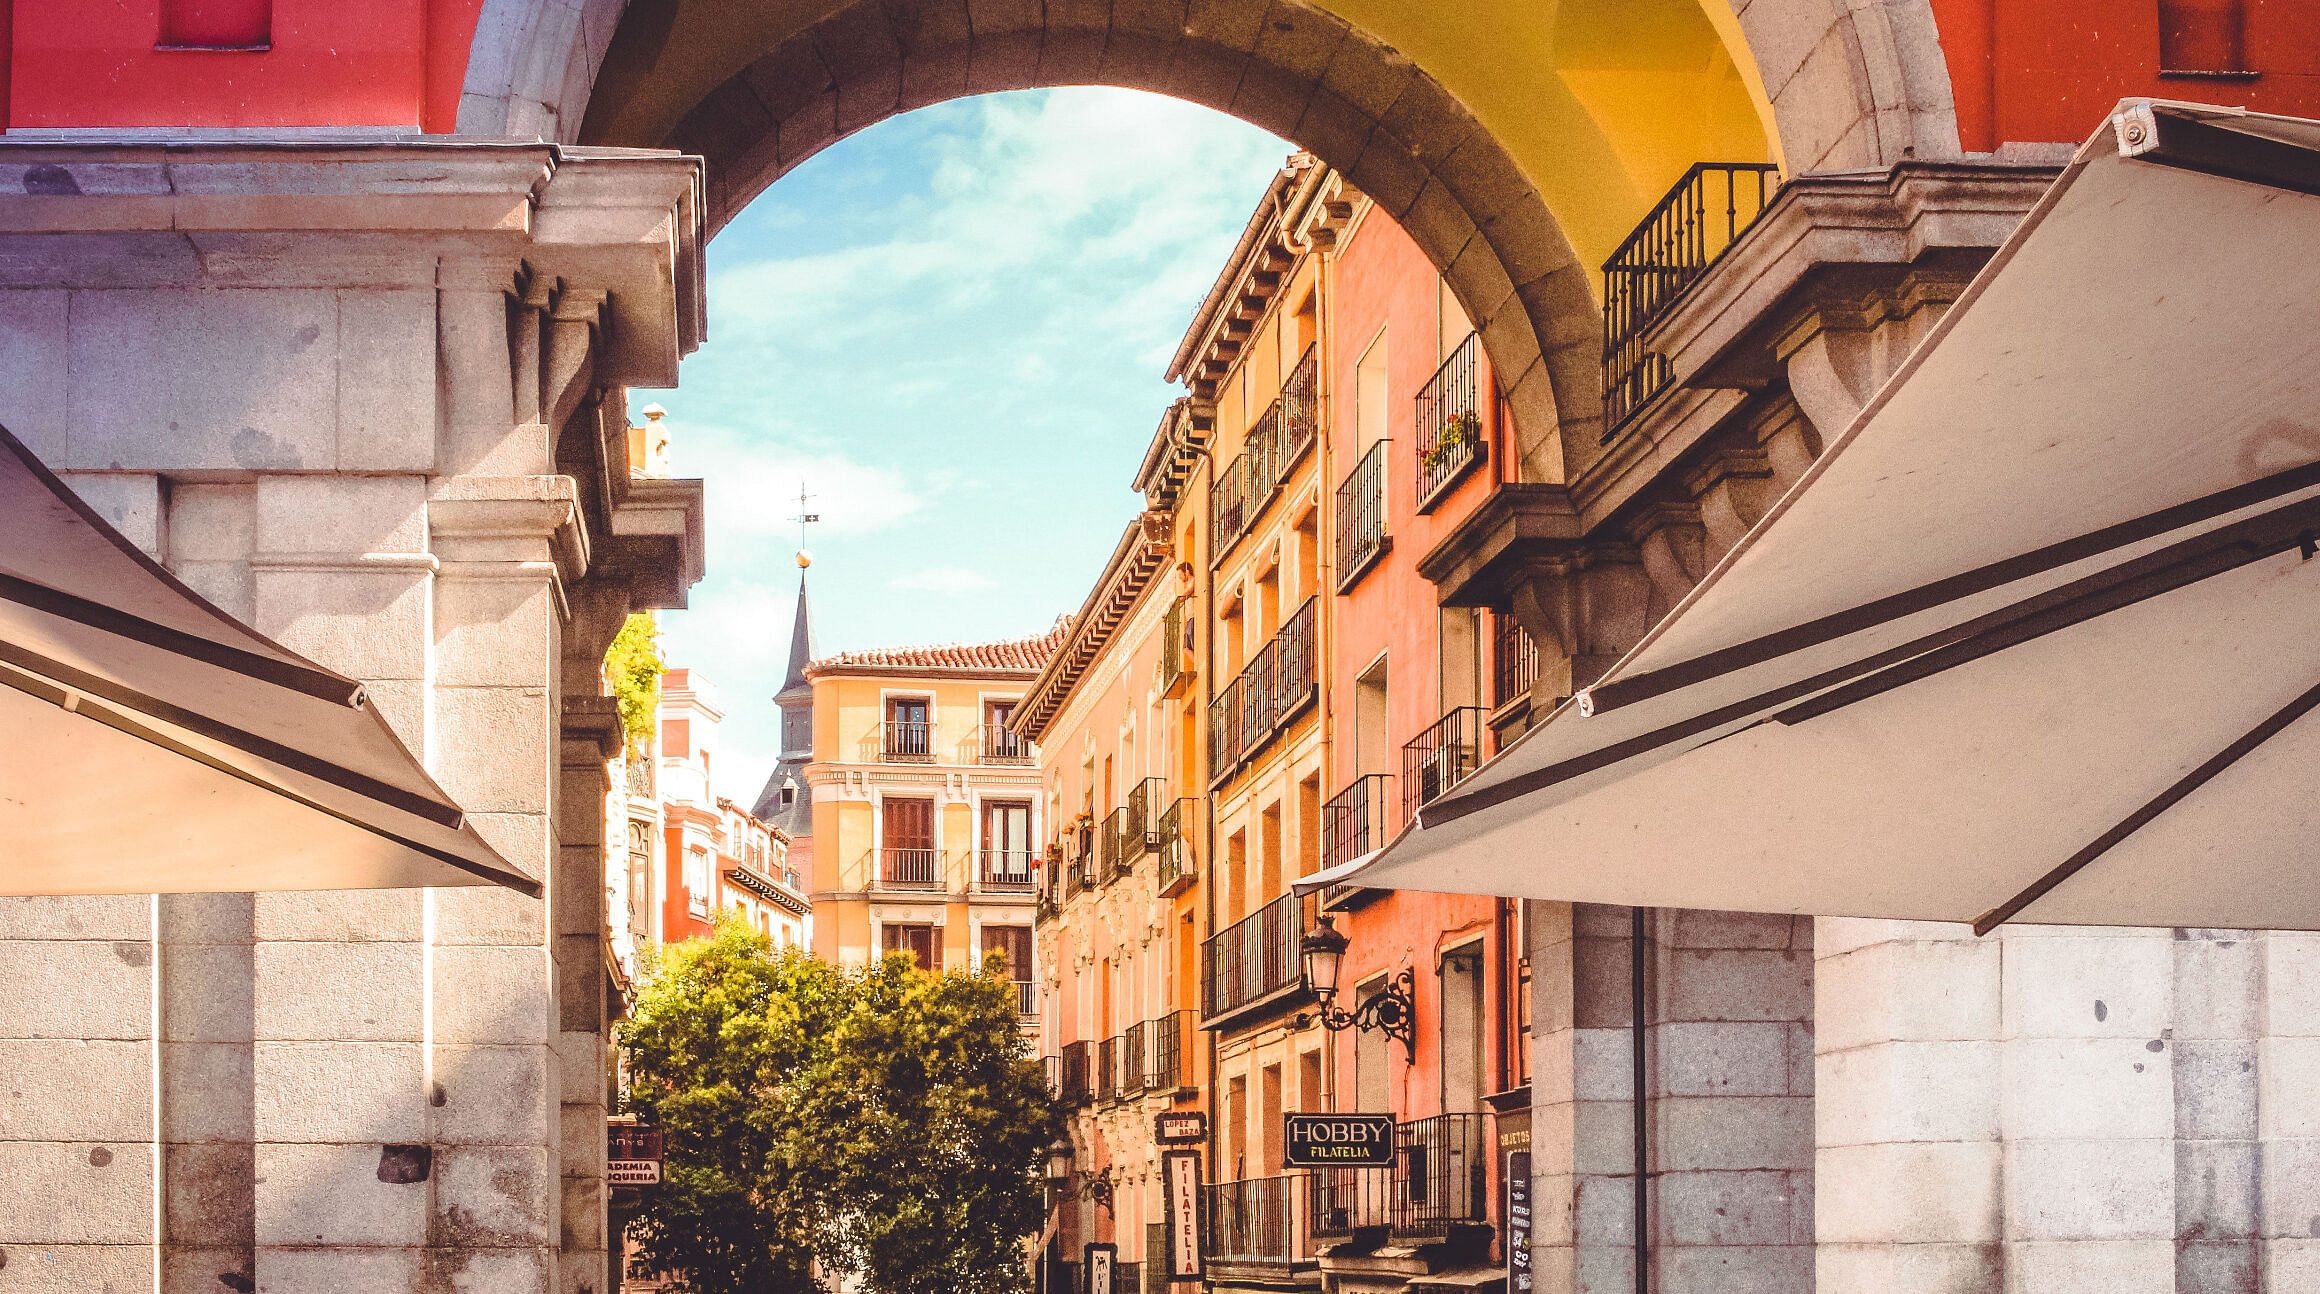 Street view of archway and buildings in Madrid, Spain